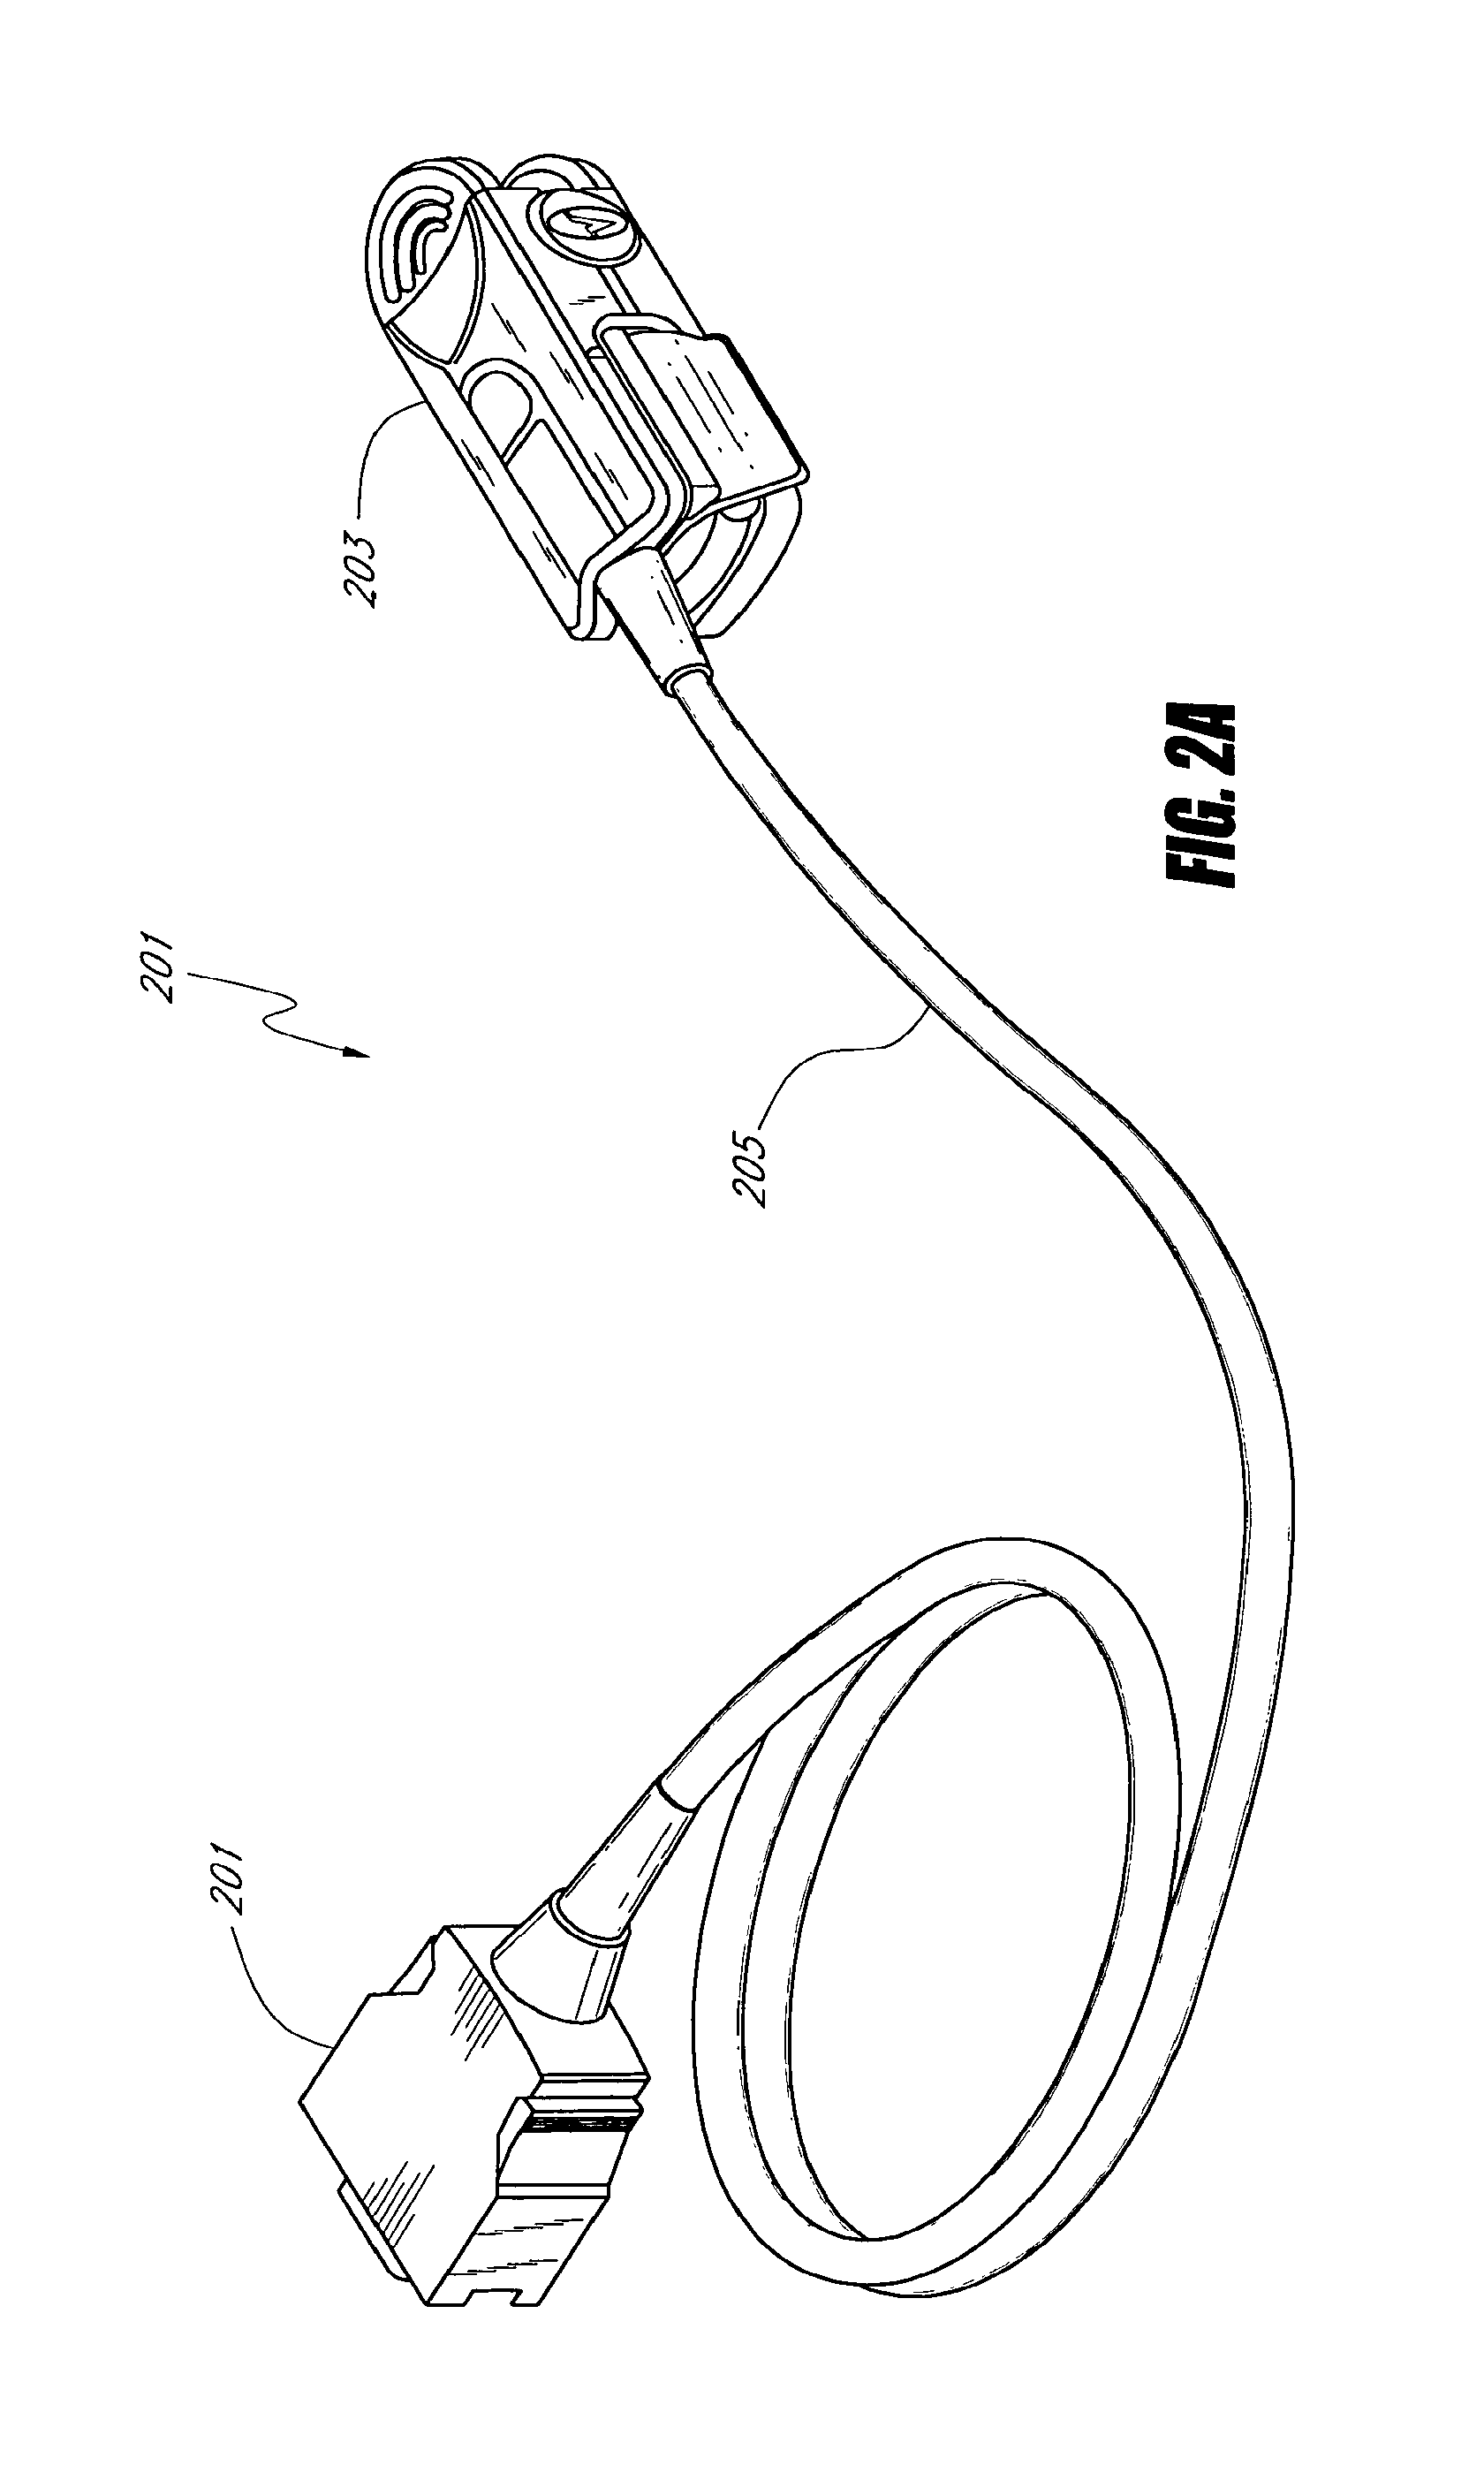 System and method for monitoring the life of a physiological sensor